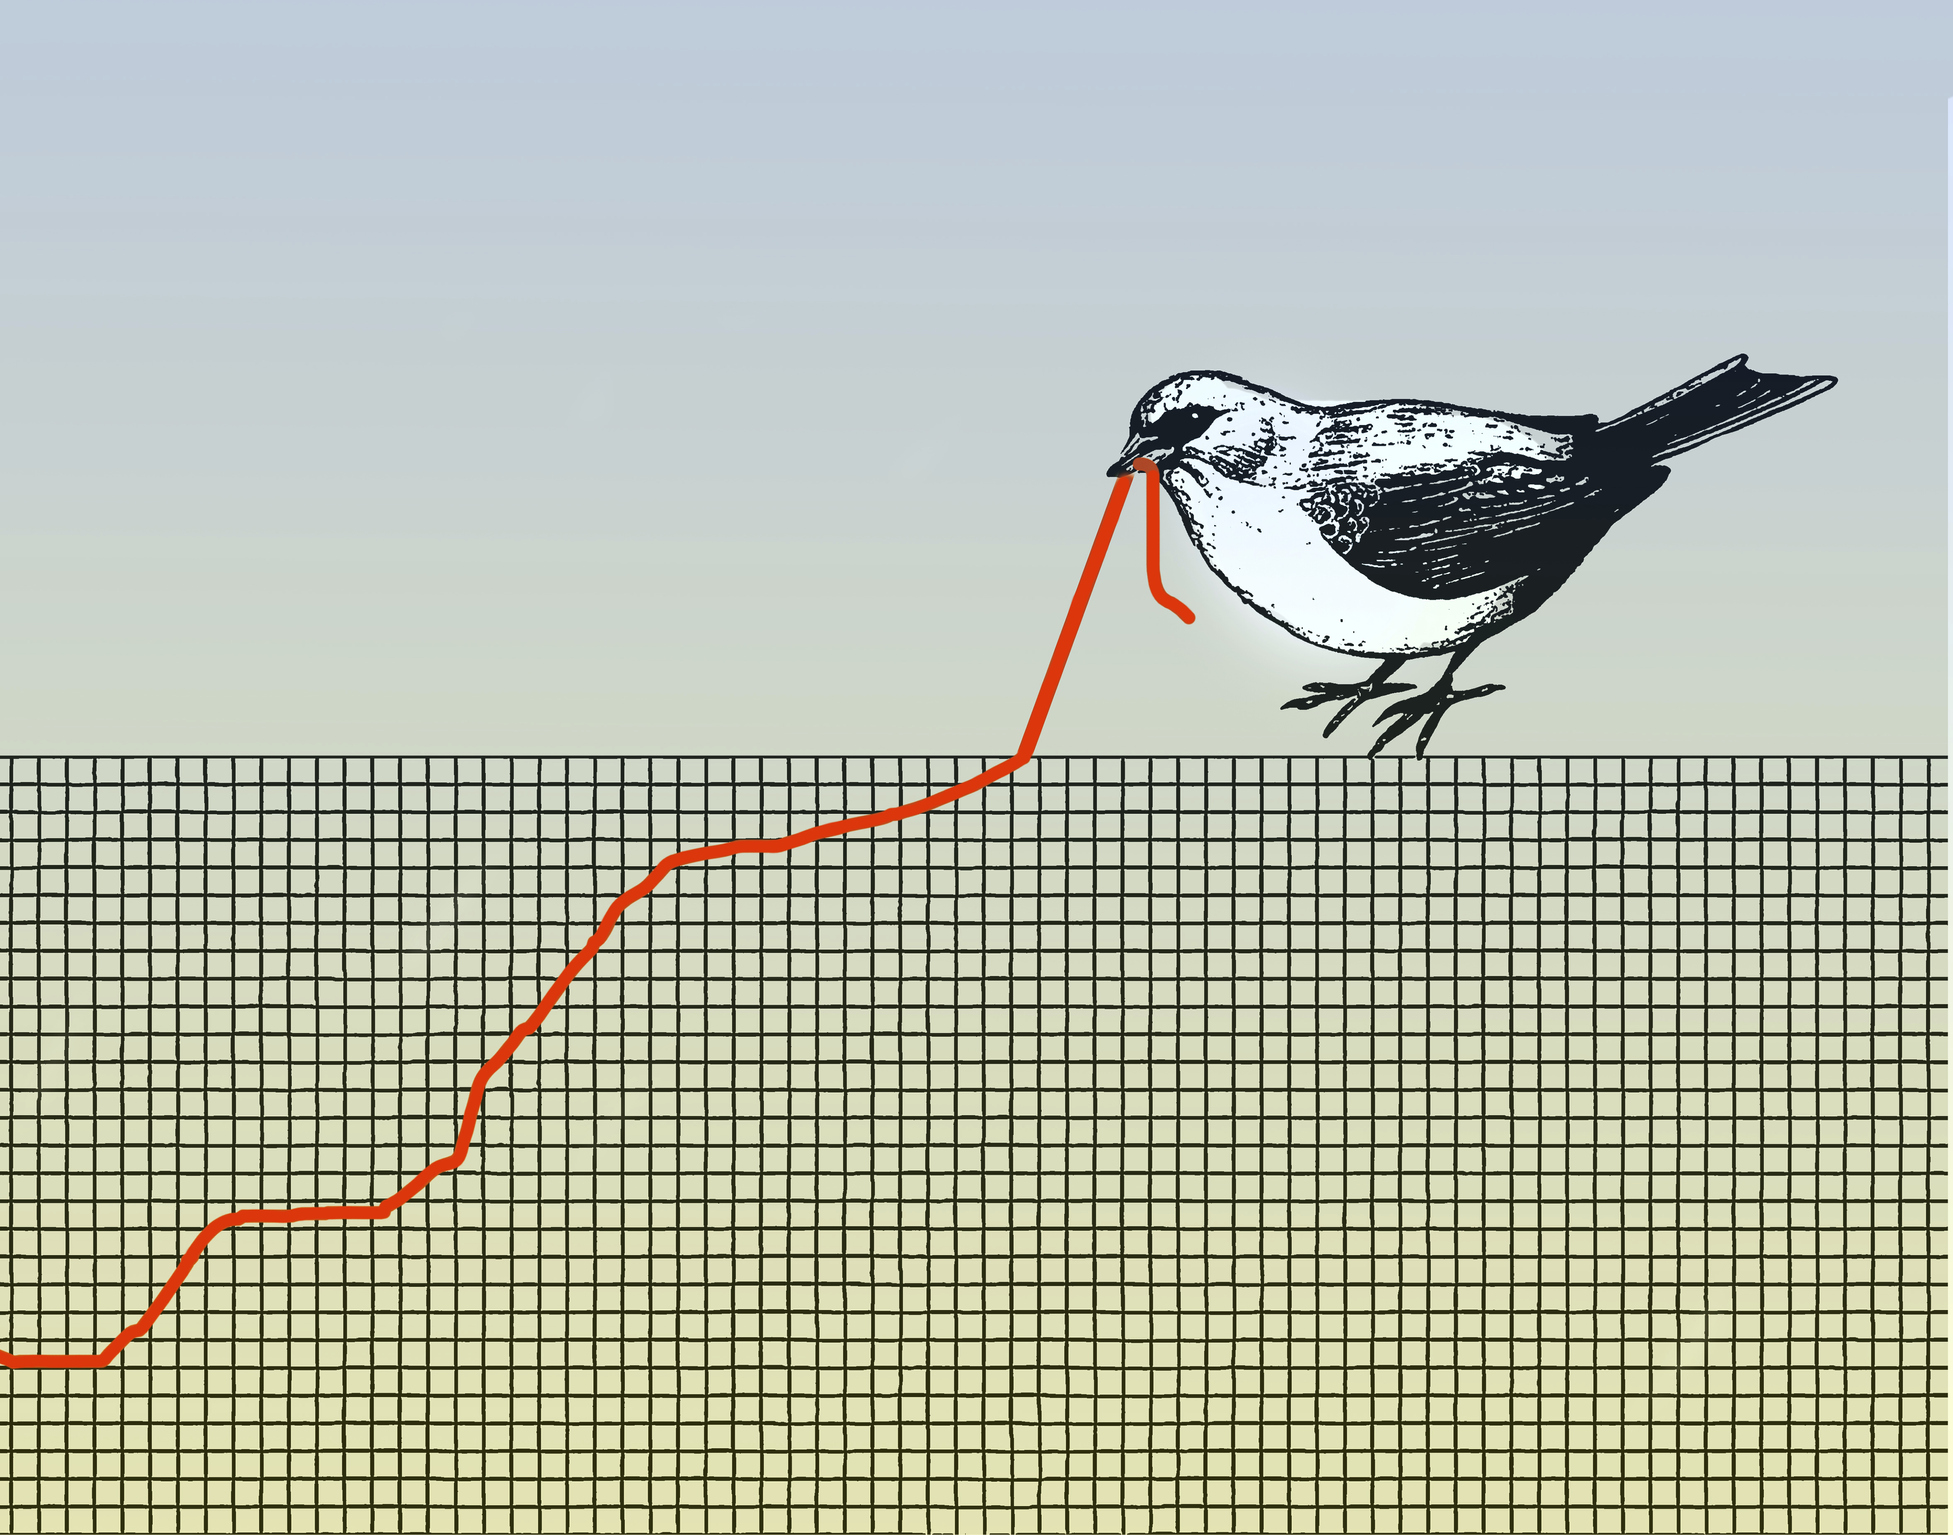 Conceptual illustration of a bird pulling at a graph that resembles a worm depicting struggle.